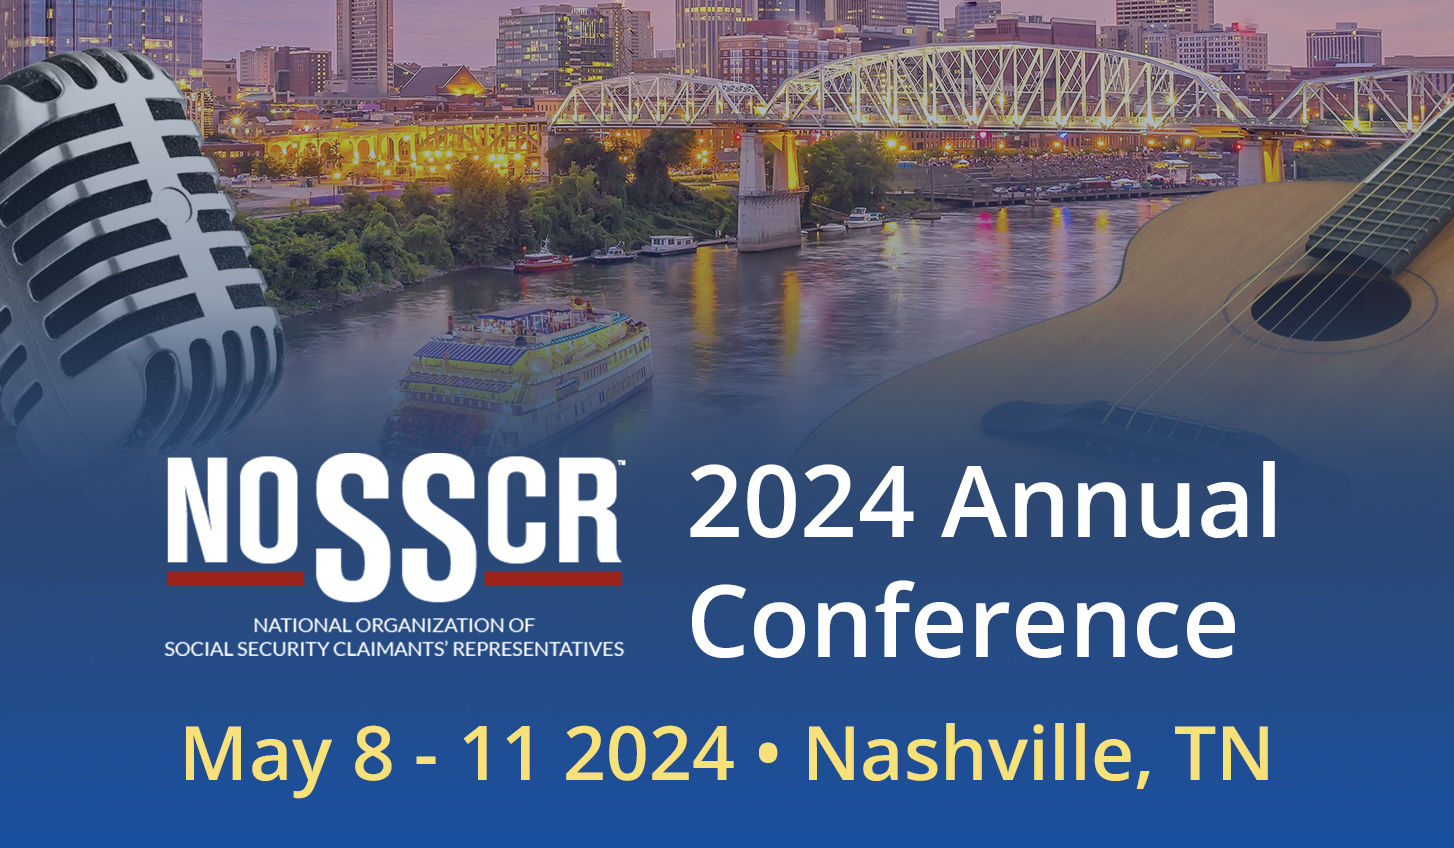 NOSSCR 2024 Annual Conference. May 8-1, 2024.